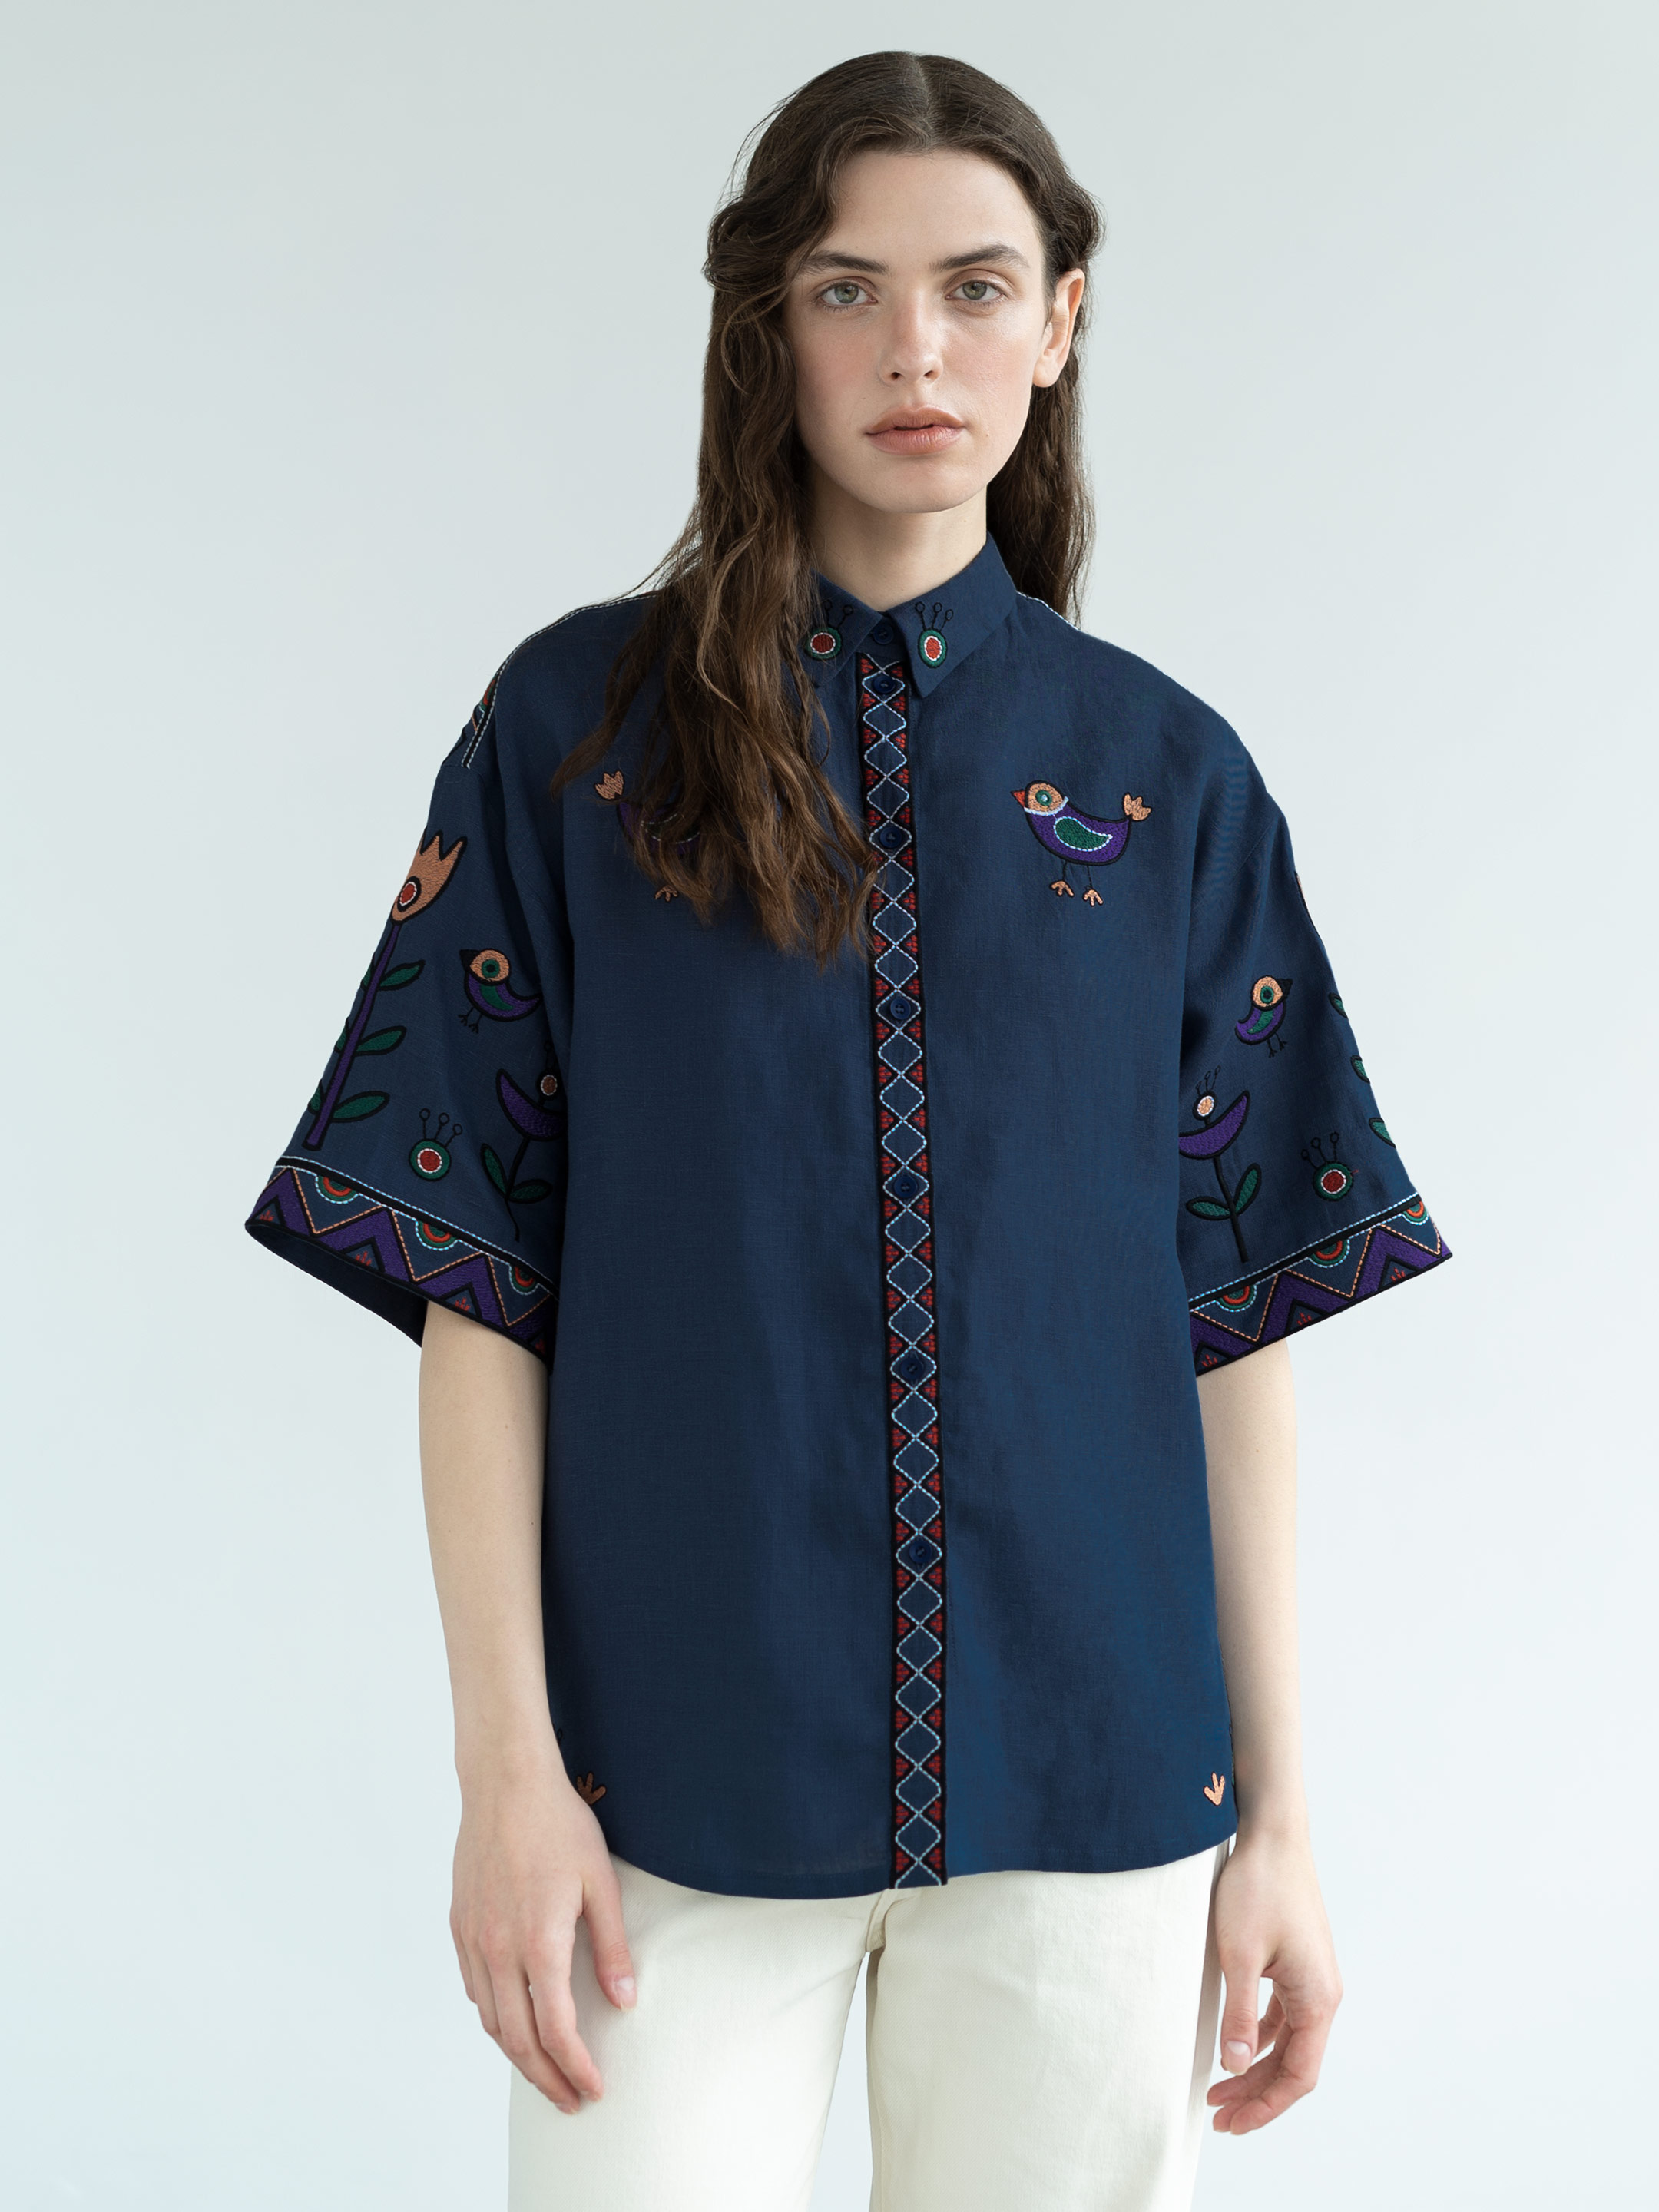 Linen shirt with embroidery Gushul Shirt - photo 1